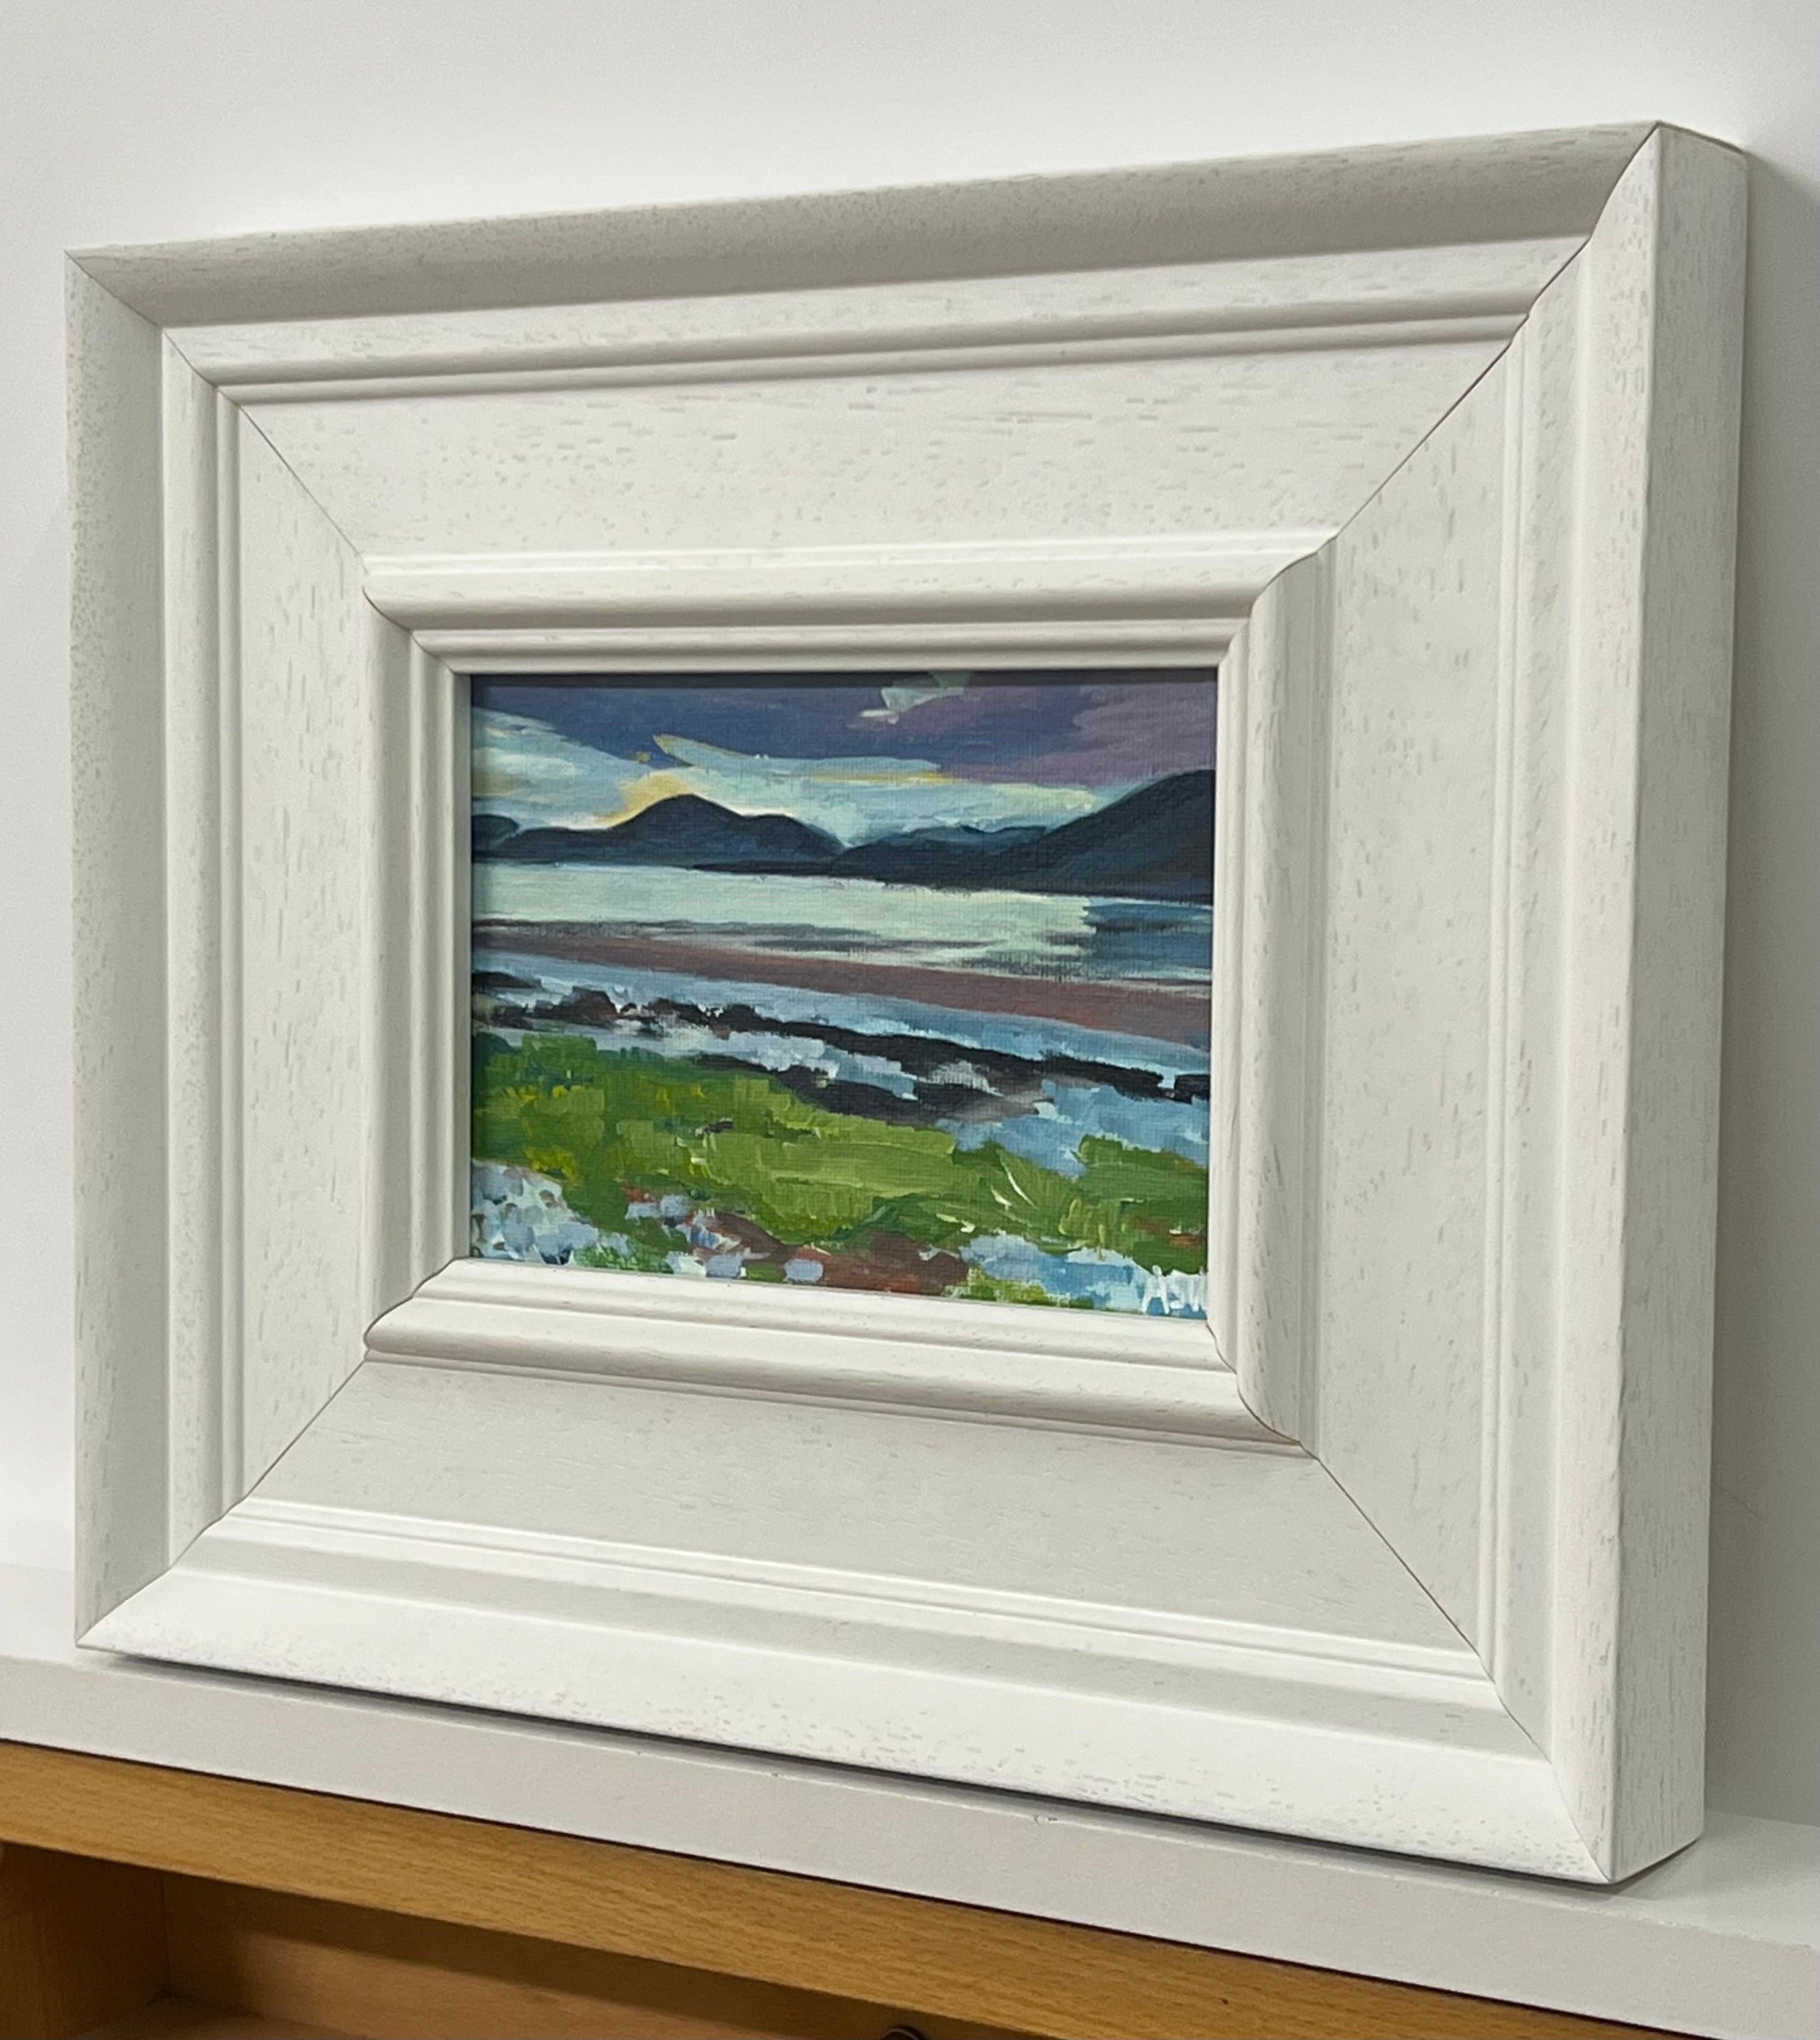 Miniature Landscape of Fort William in the Scottish Highlands by British Artist - Contemporary Painting by Angela Wakefield